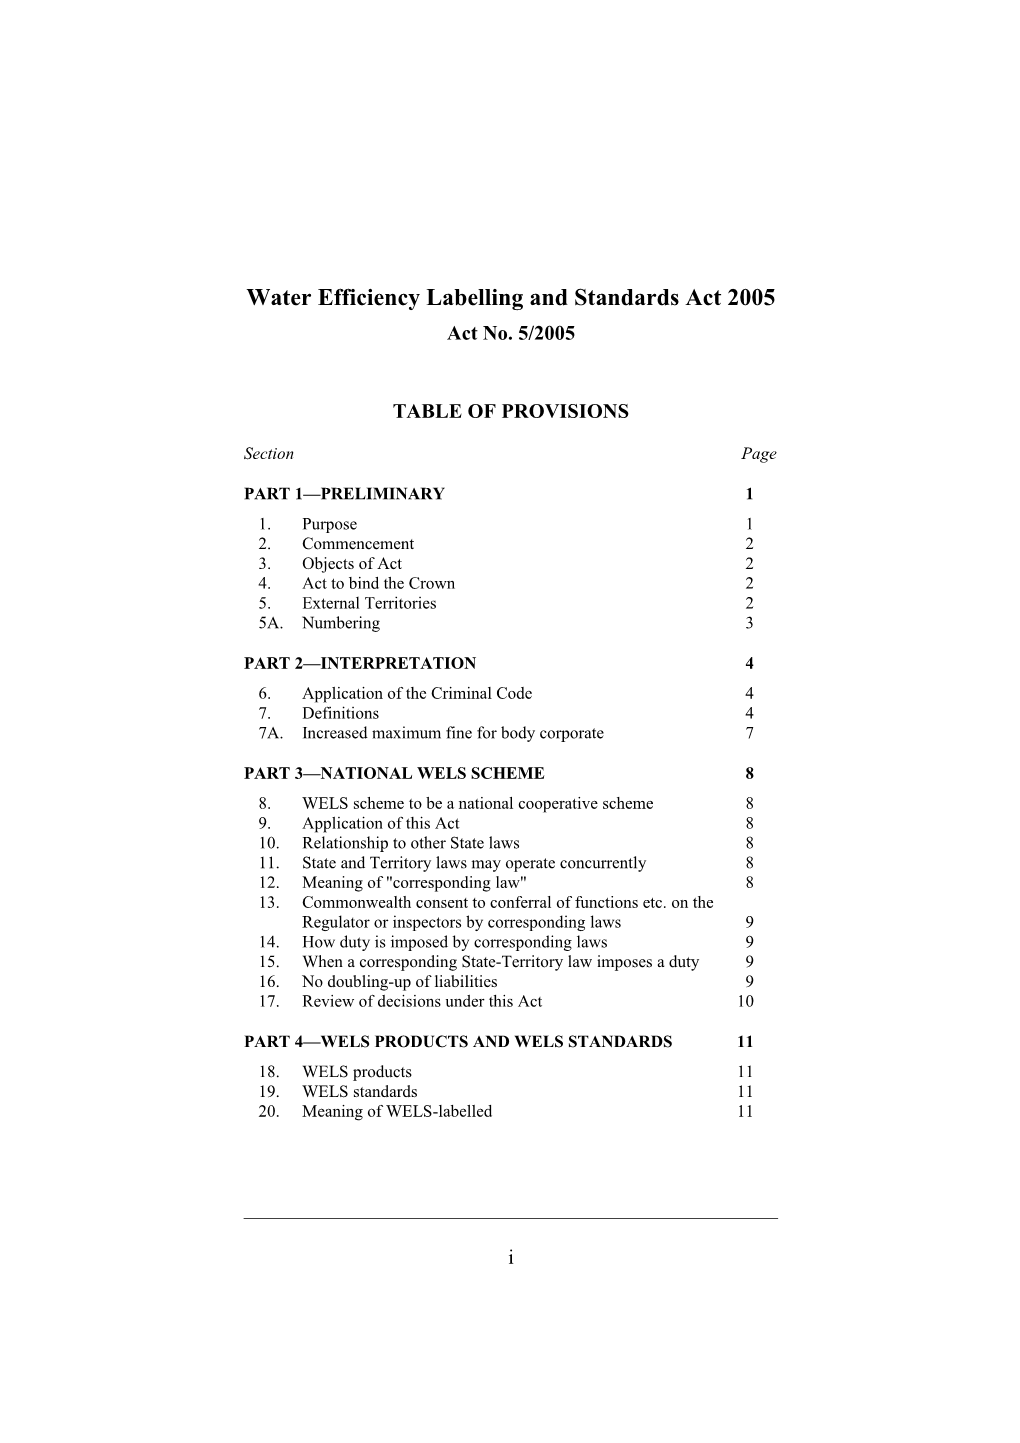 Water Efficiency Labelling and Standards Act 2005